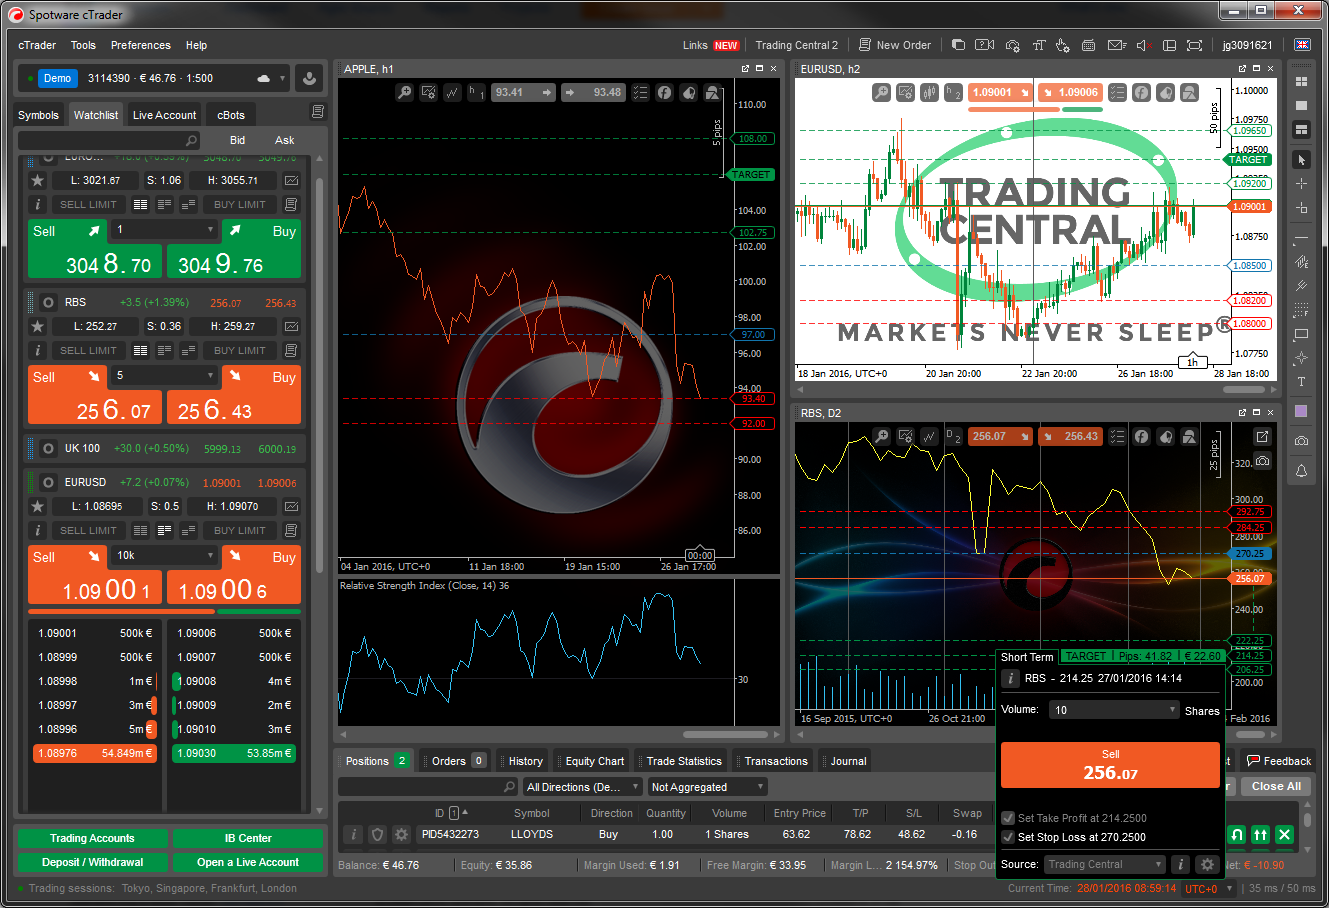 Trading Central's module within the cTrader trading platform